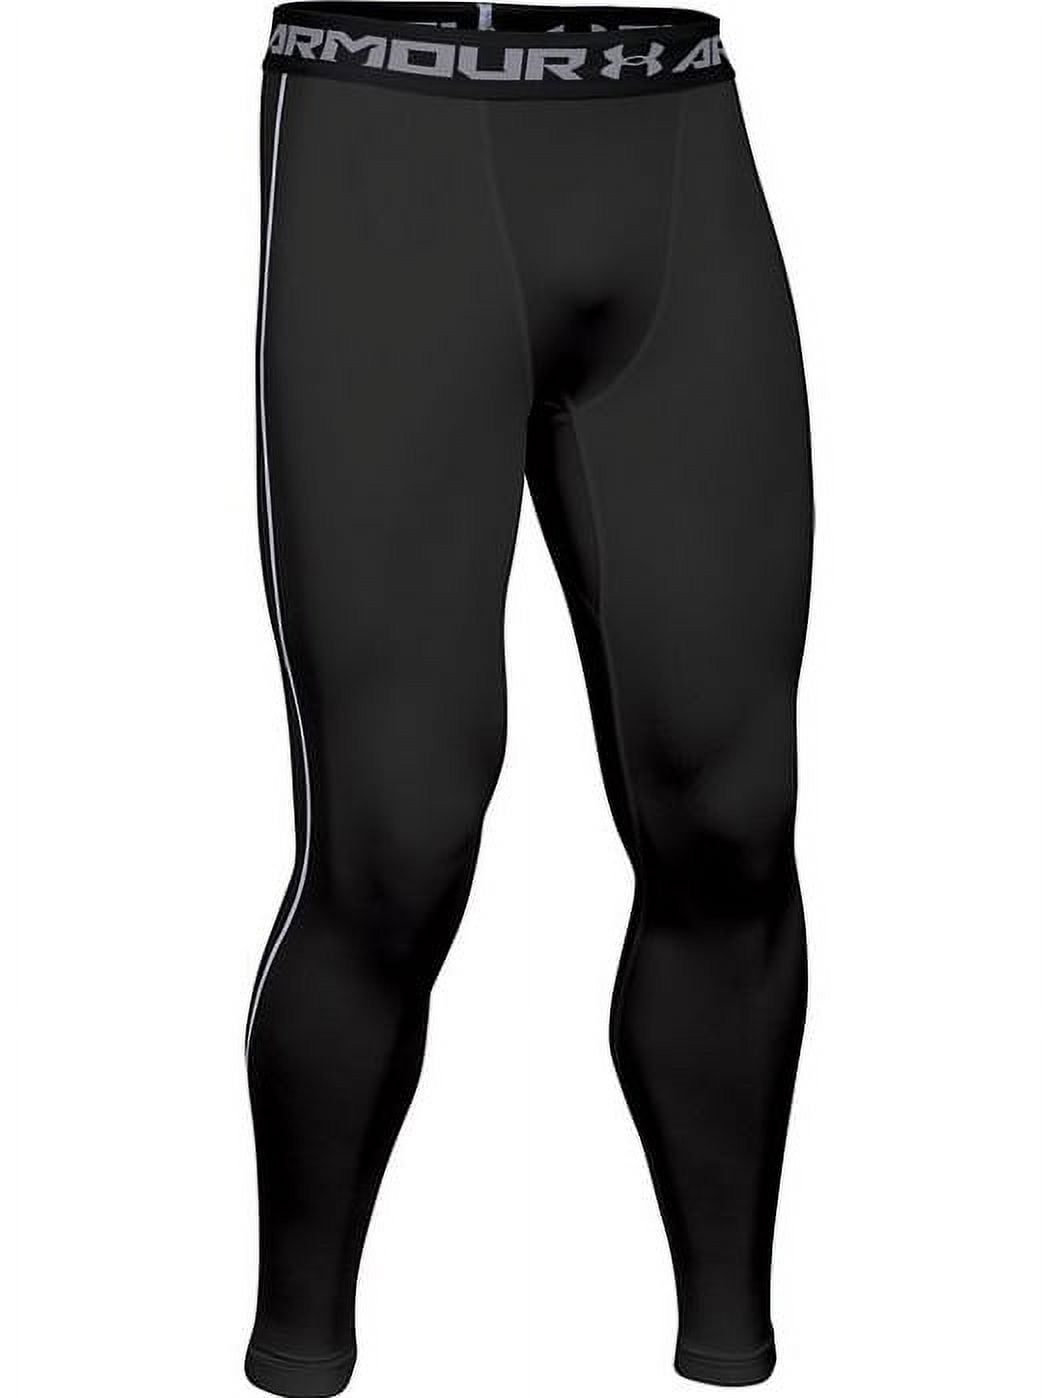 Separatec Men's Compression Pants with Dual Hungary | Ubuy